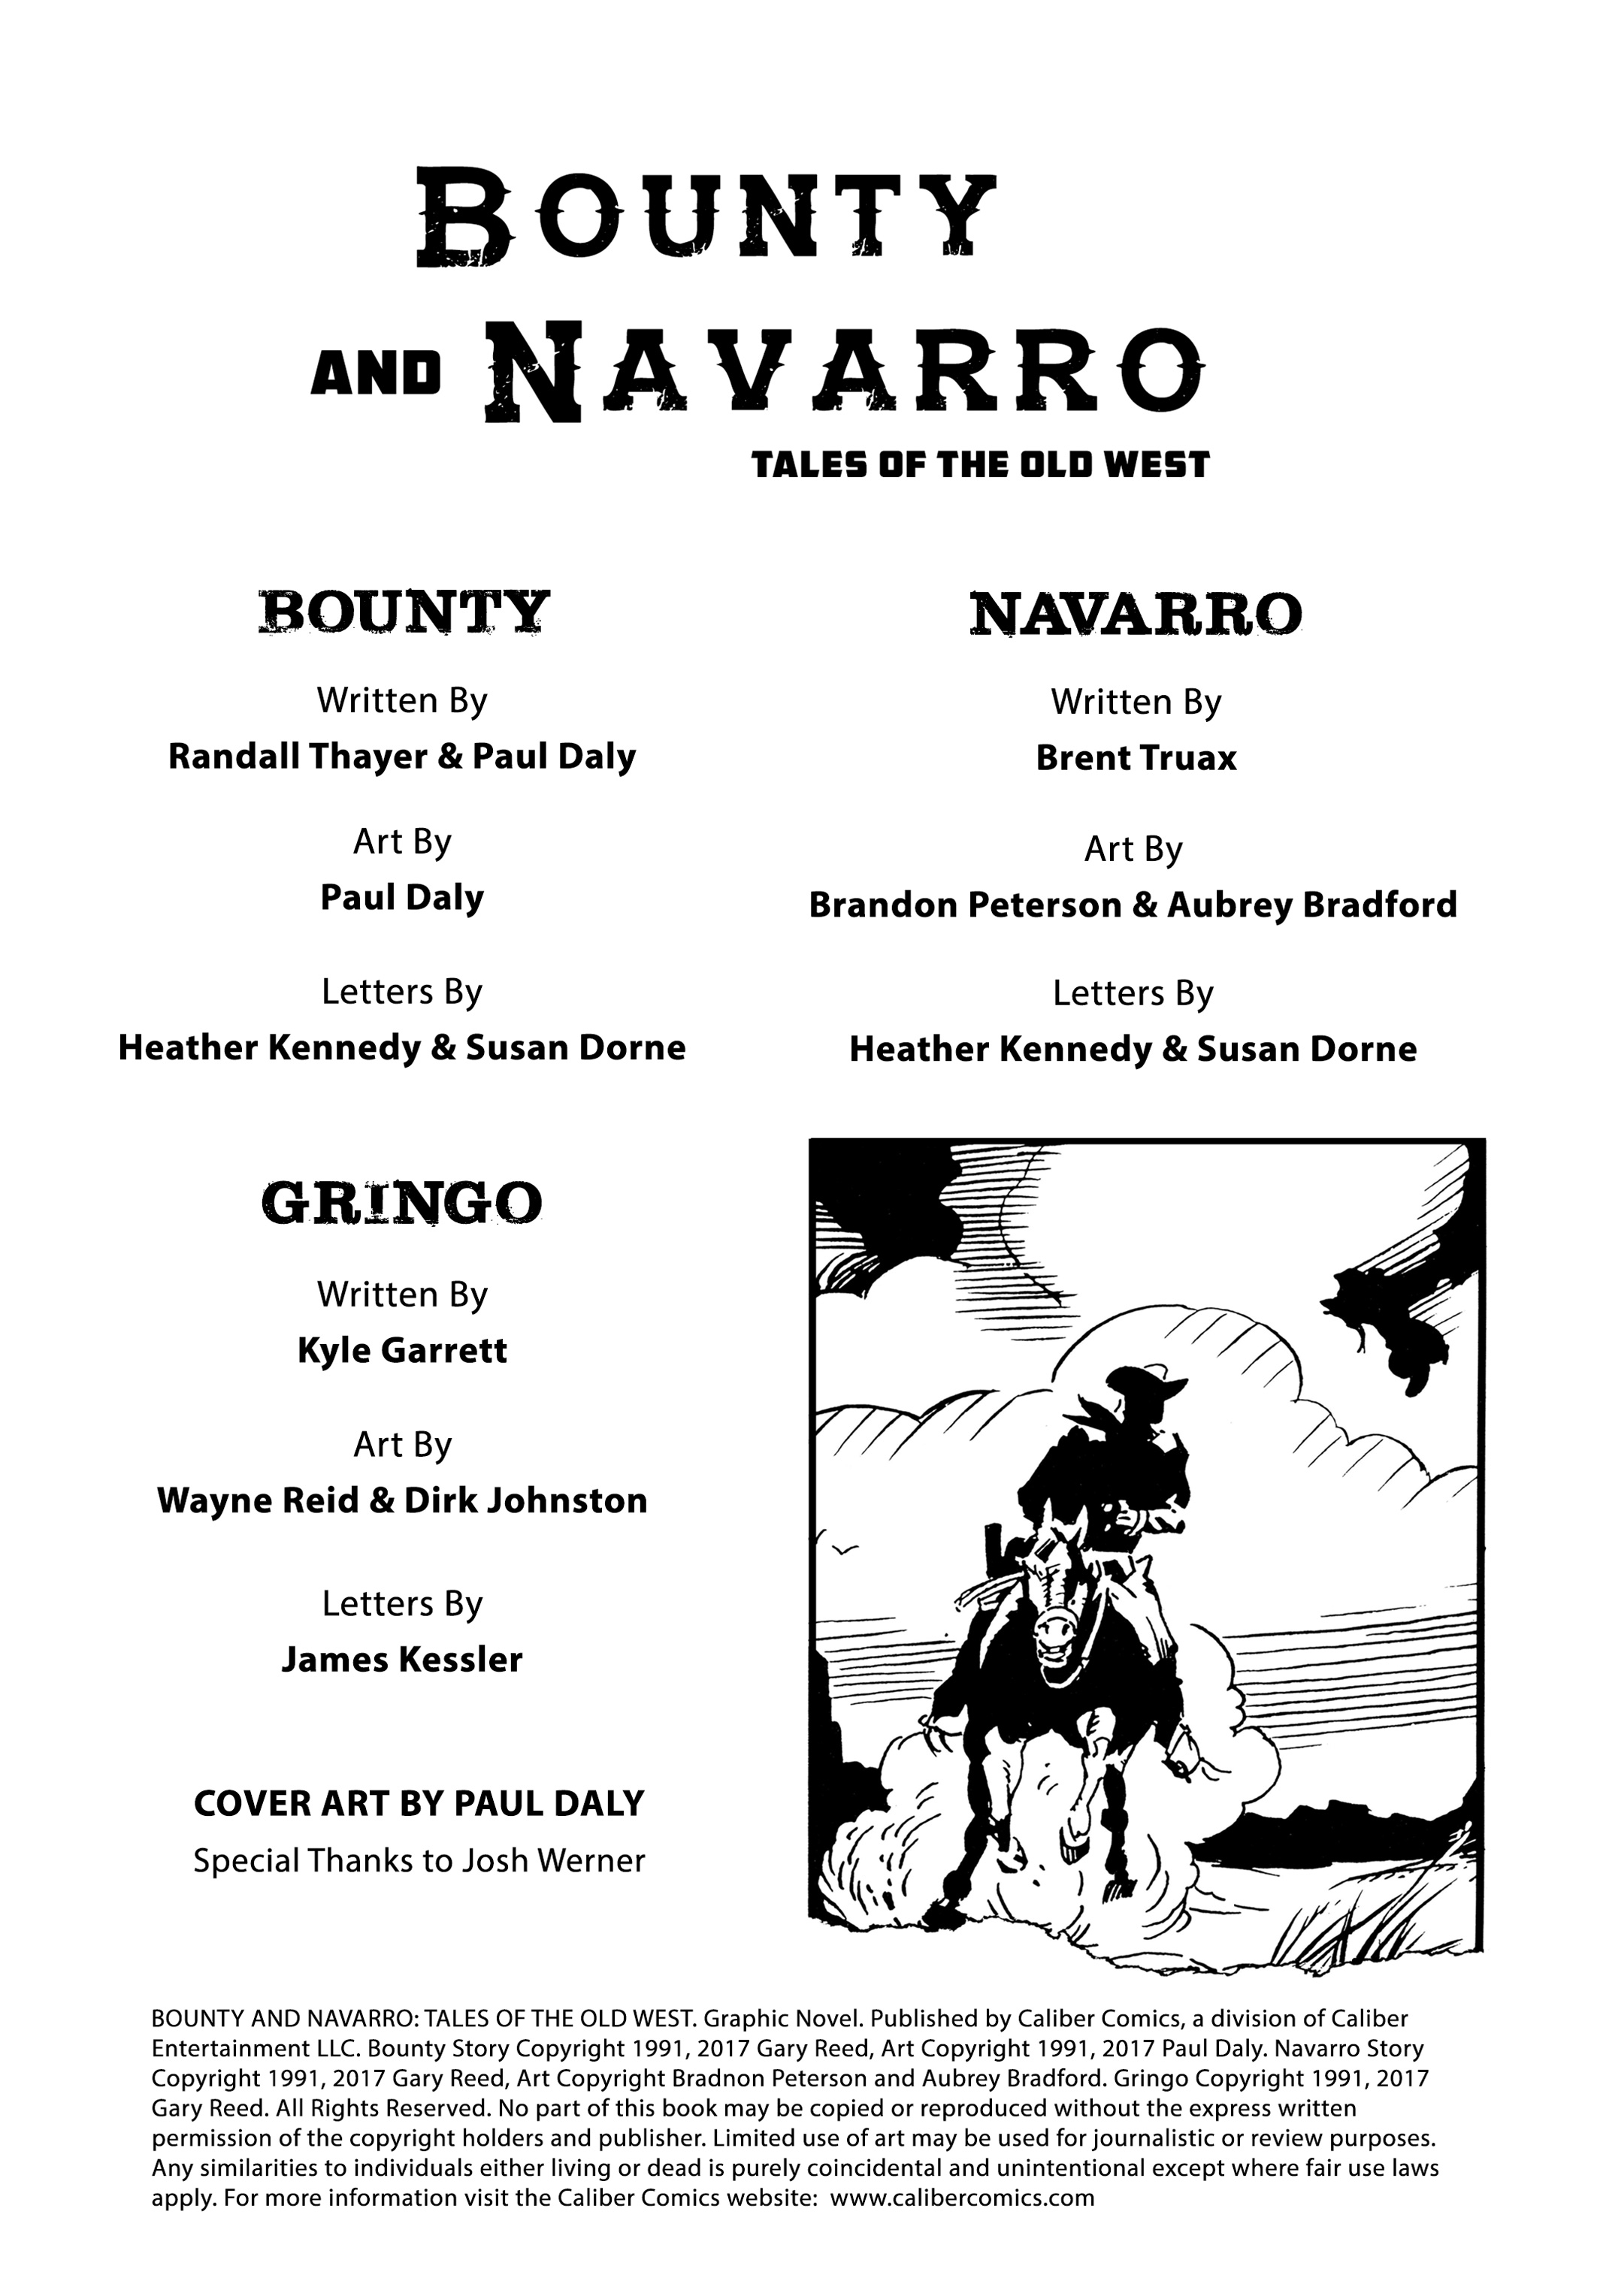 Read online Bounty and Navarro: Tales of the Old West comic -  Issue # TPB - 3